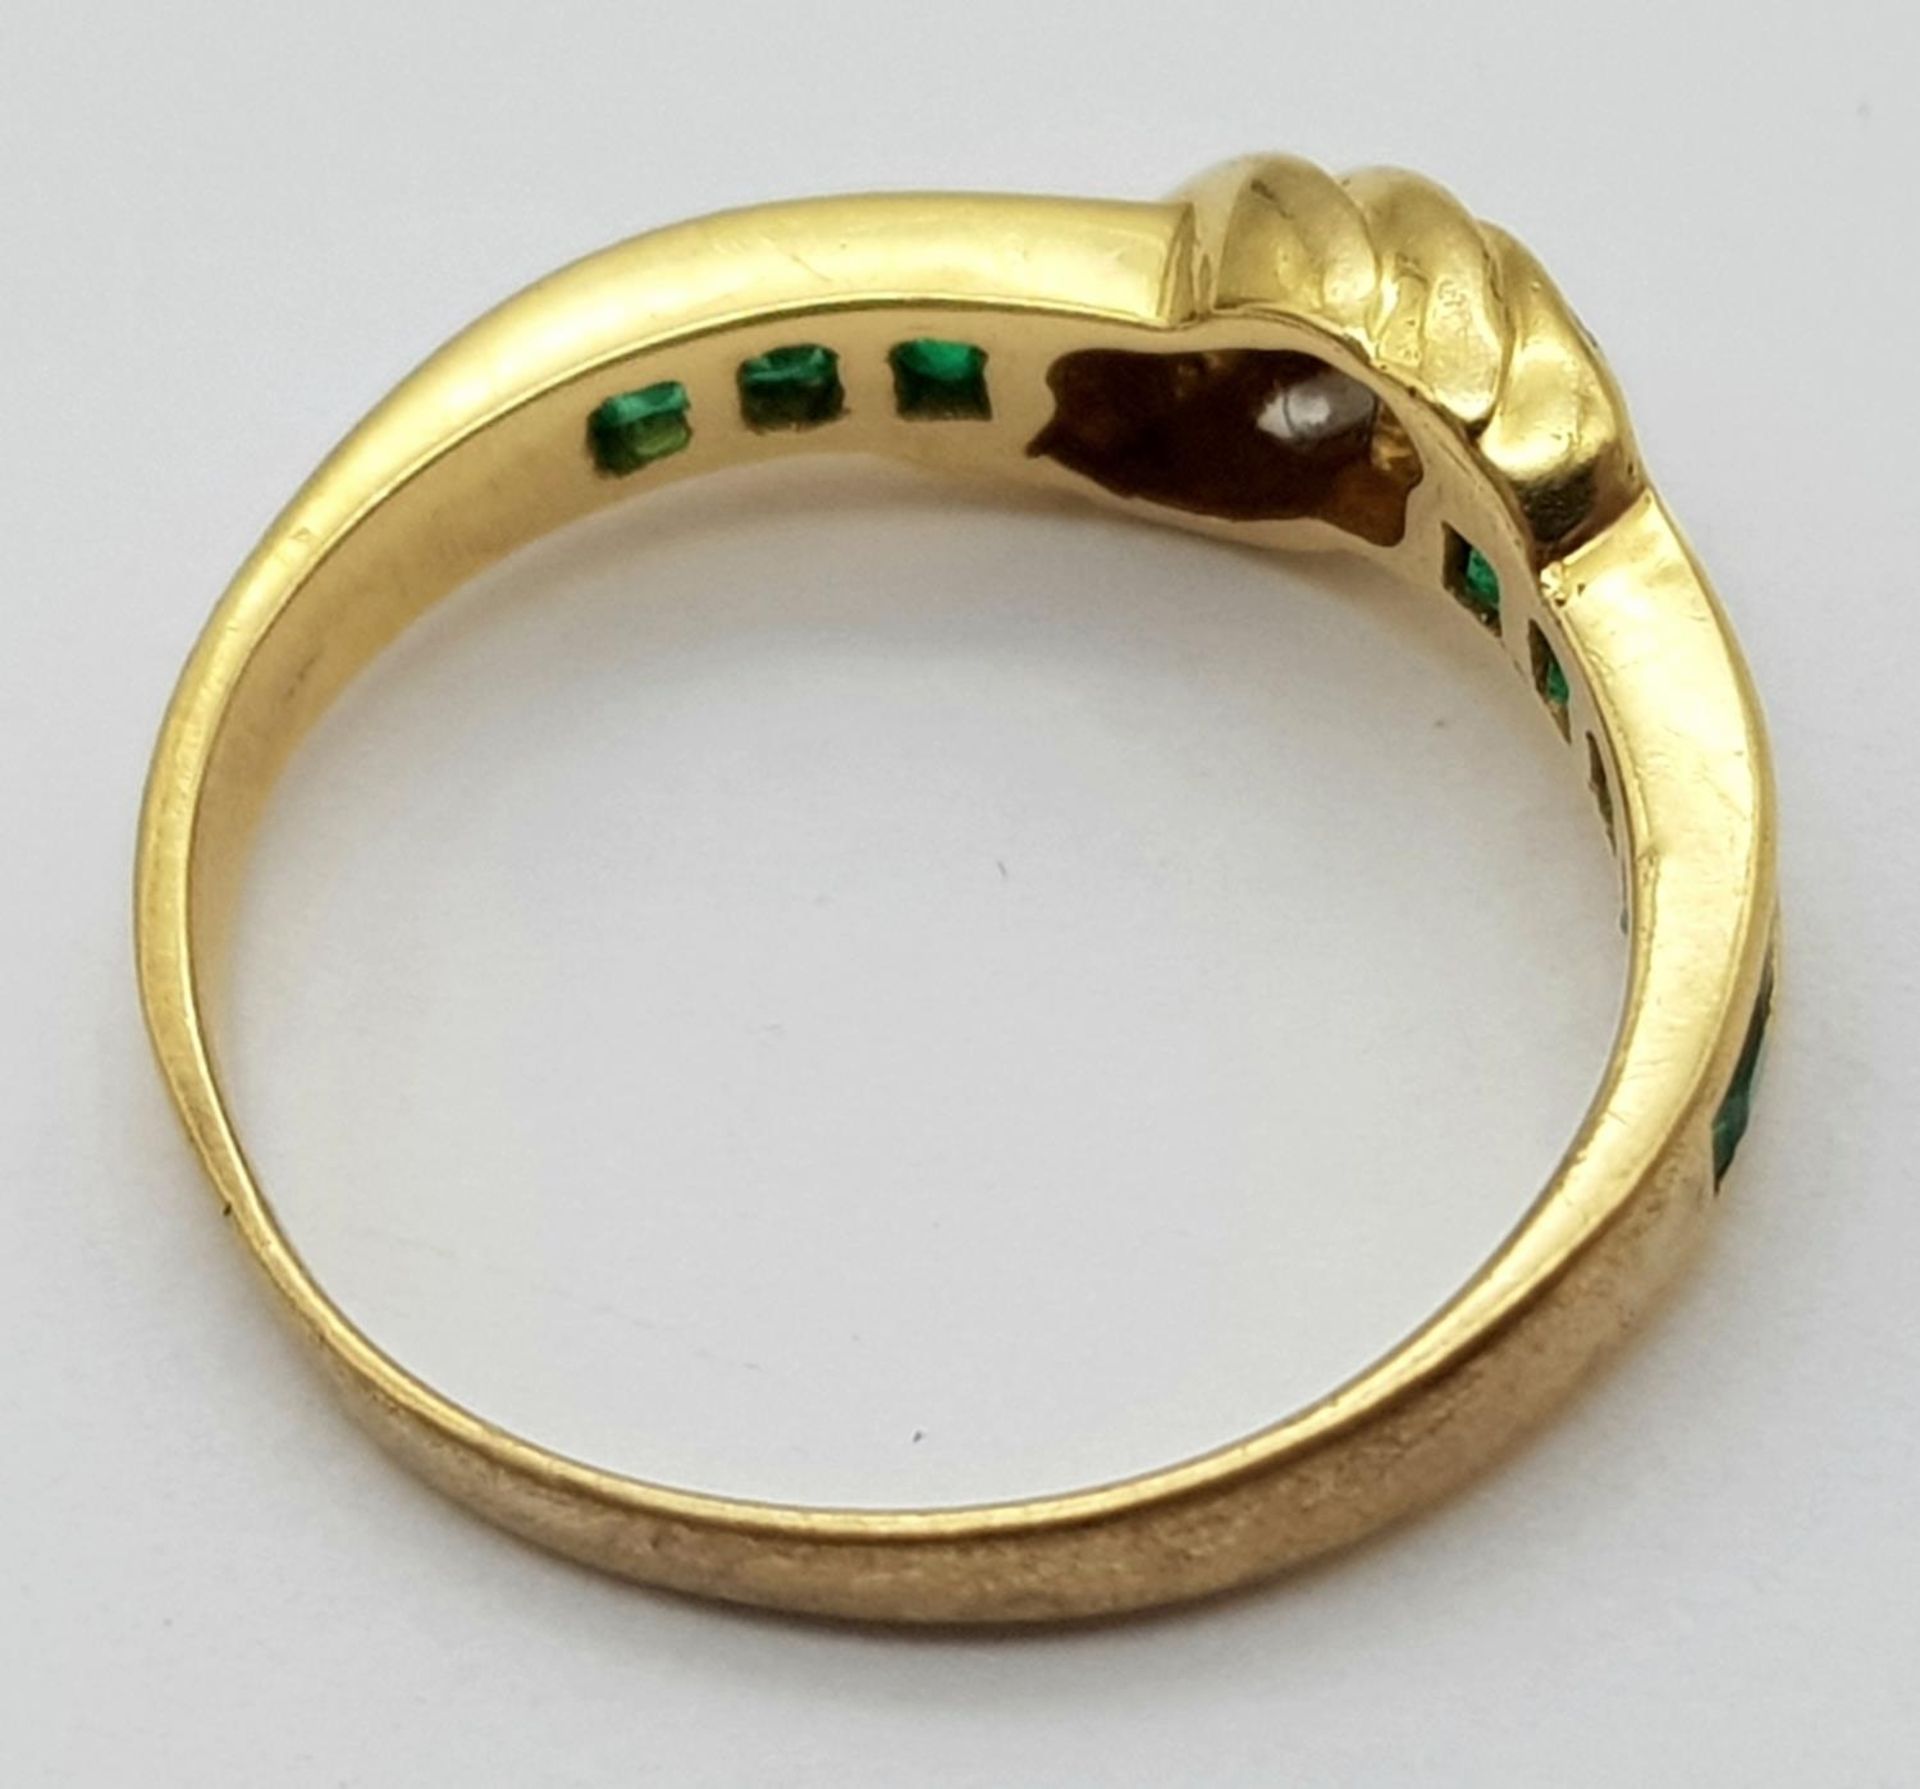 AN 18K YELLOW GOLD DIAMOND & EMERALD RING. Size J, 2.3g total weight. Ref: SC 9052 - Image 5 of 6